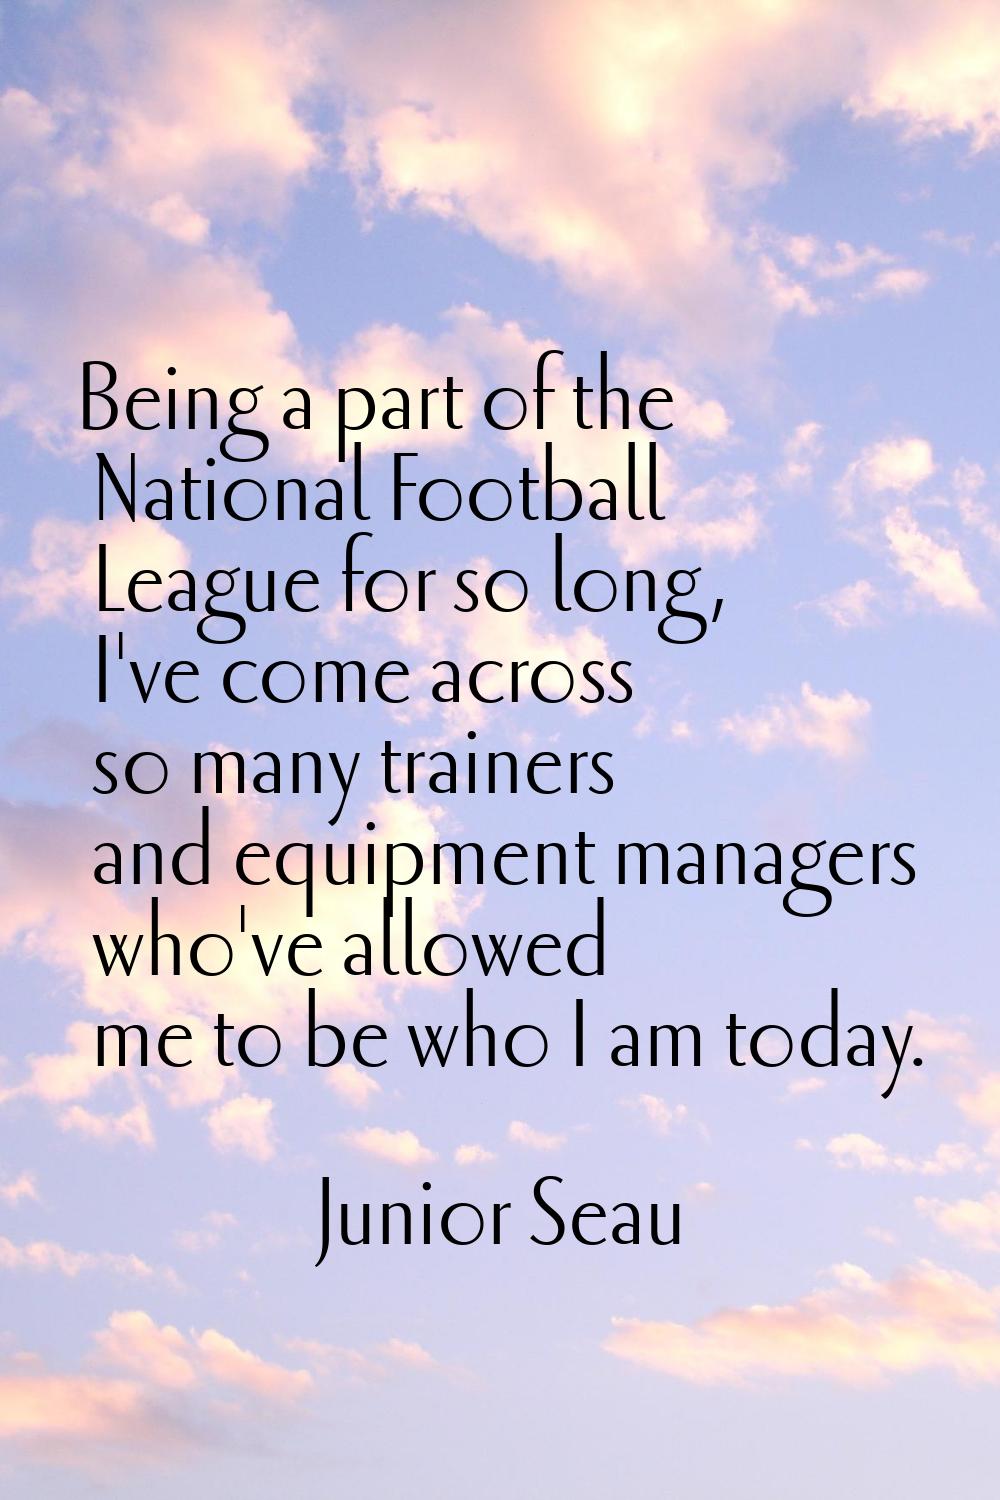 Being a part of the National Football League for so long, I've come across so many trainers and equ